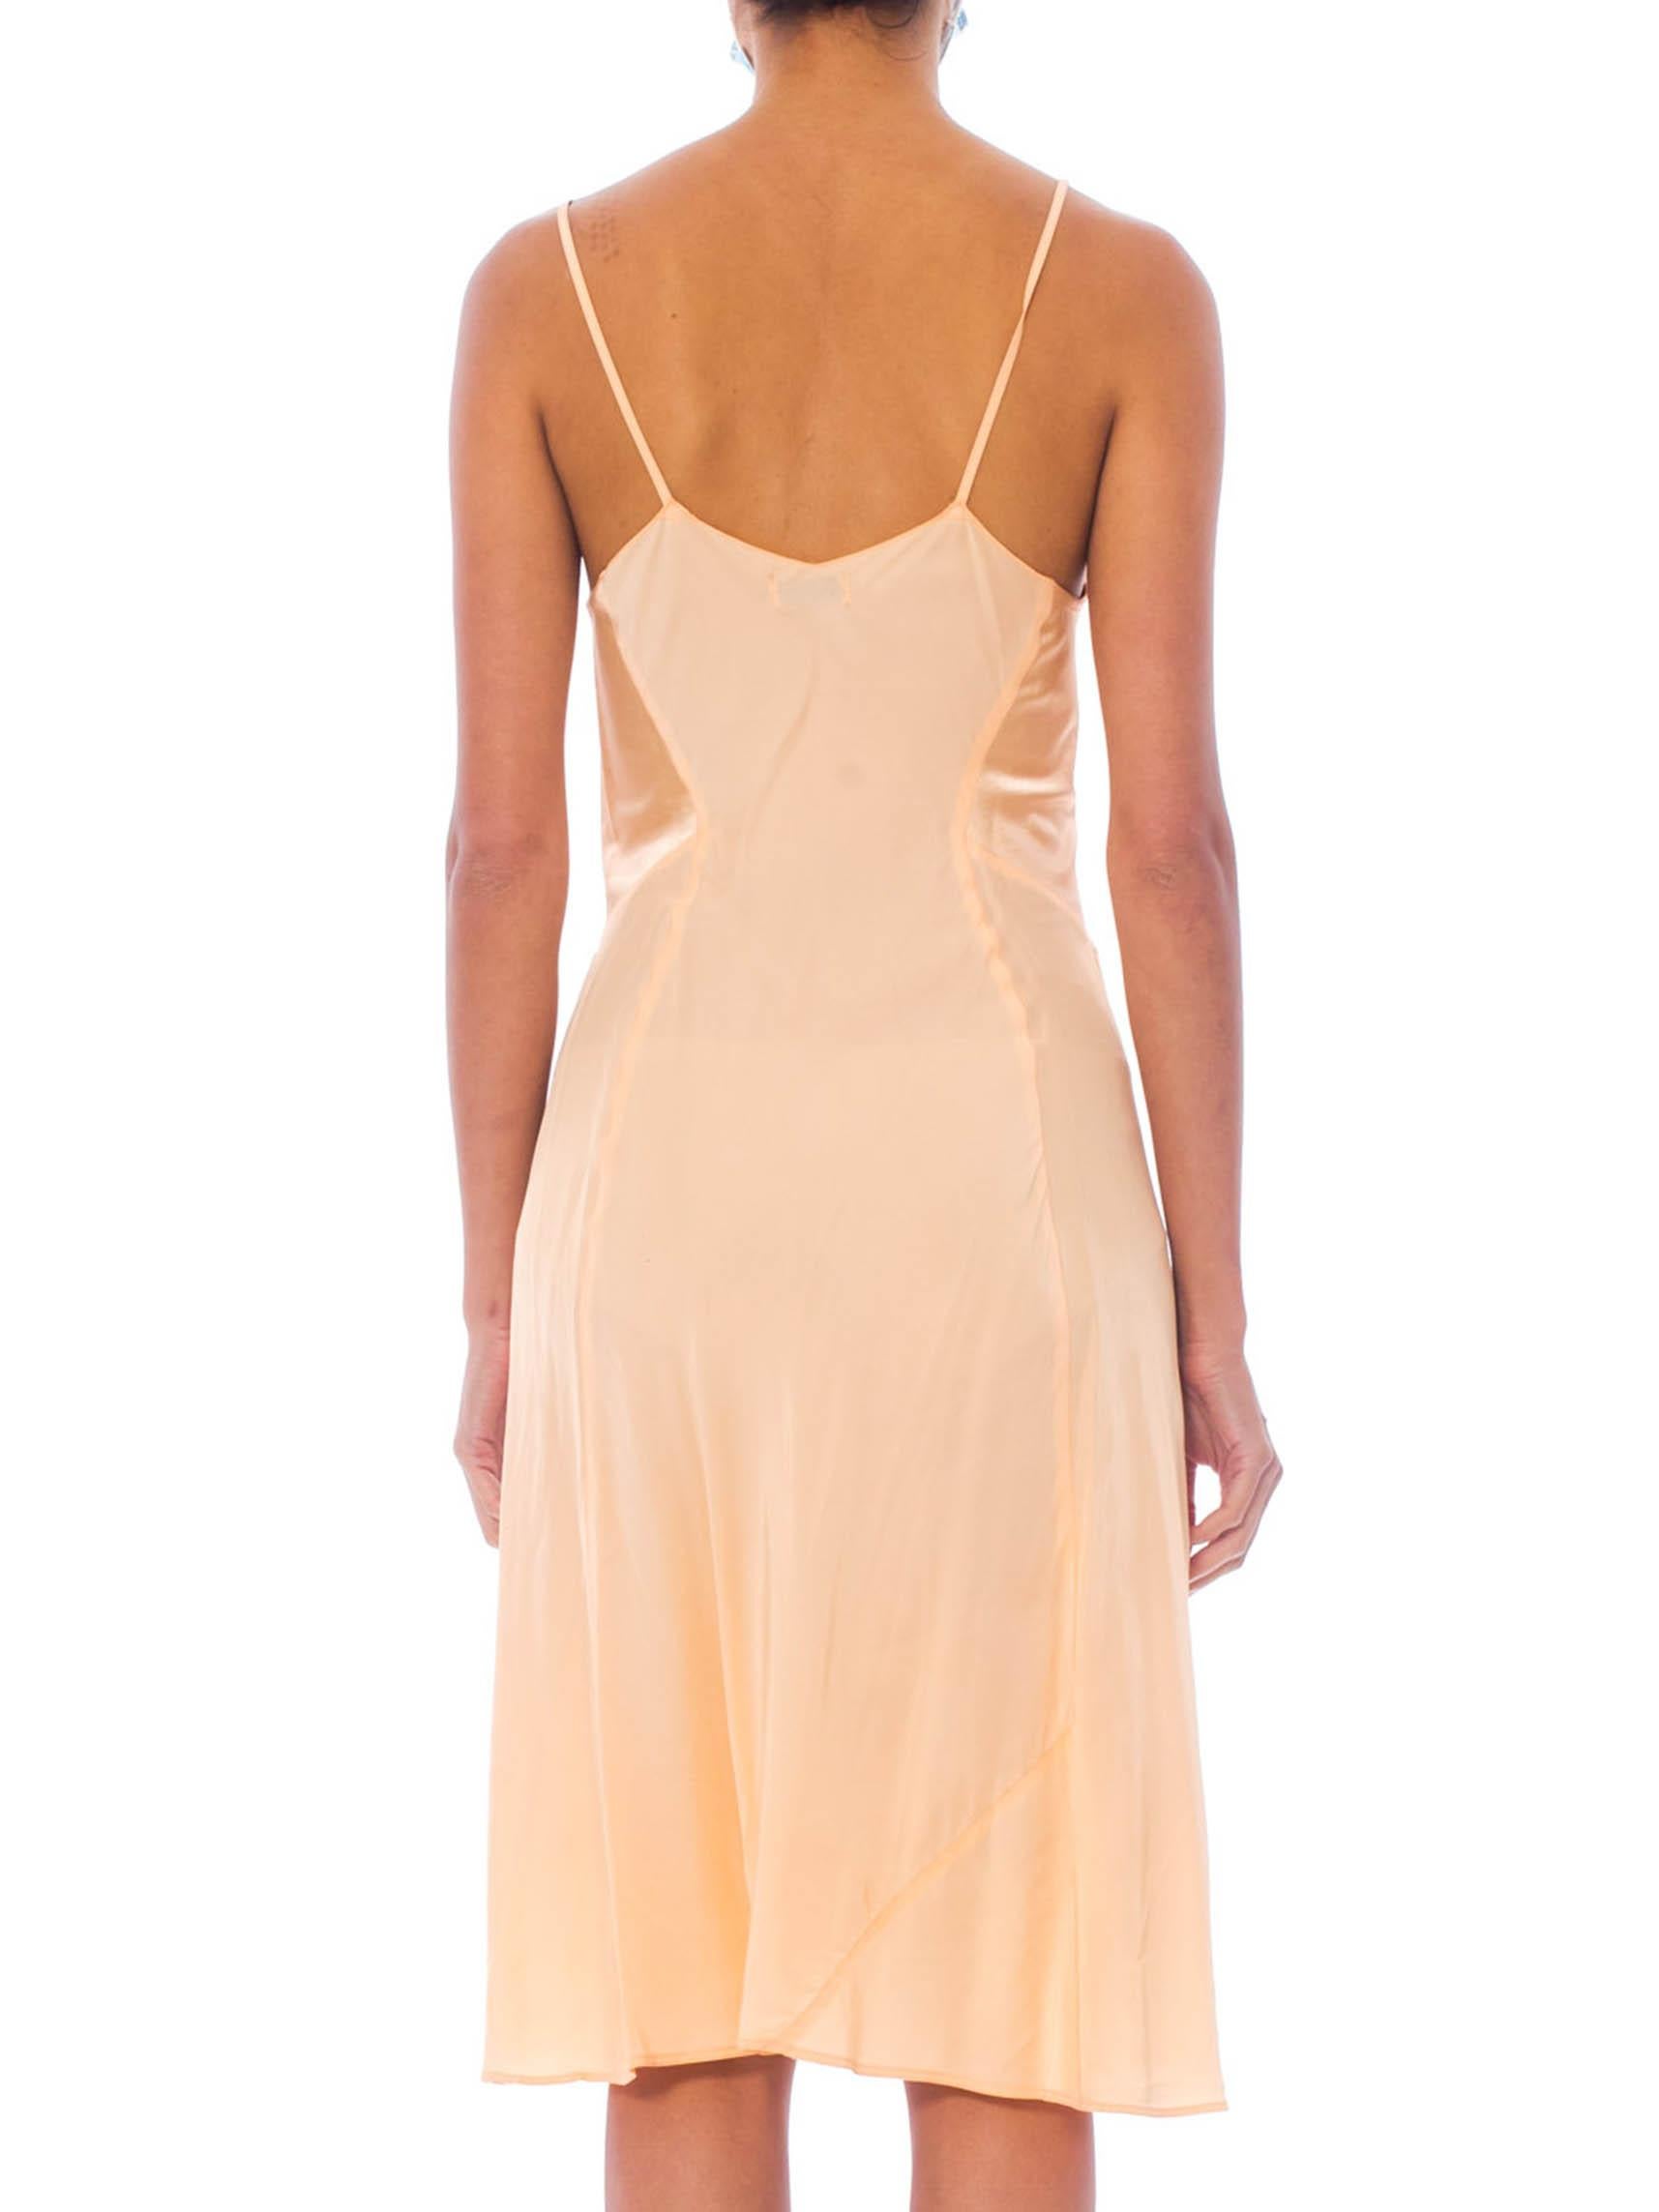 Women's 1940S Peach Bias Cut Rayon Slip Dress With Elastic Side Panels For Fit